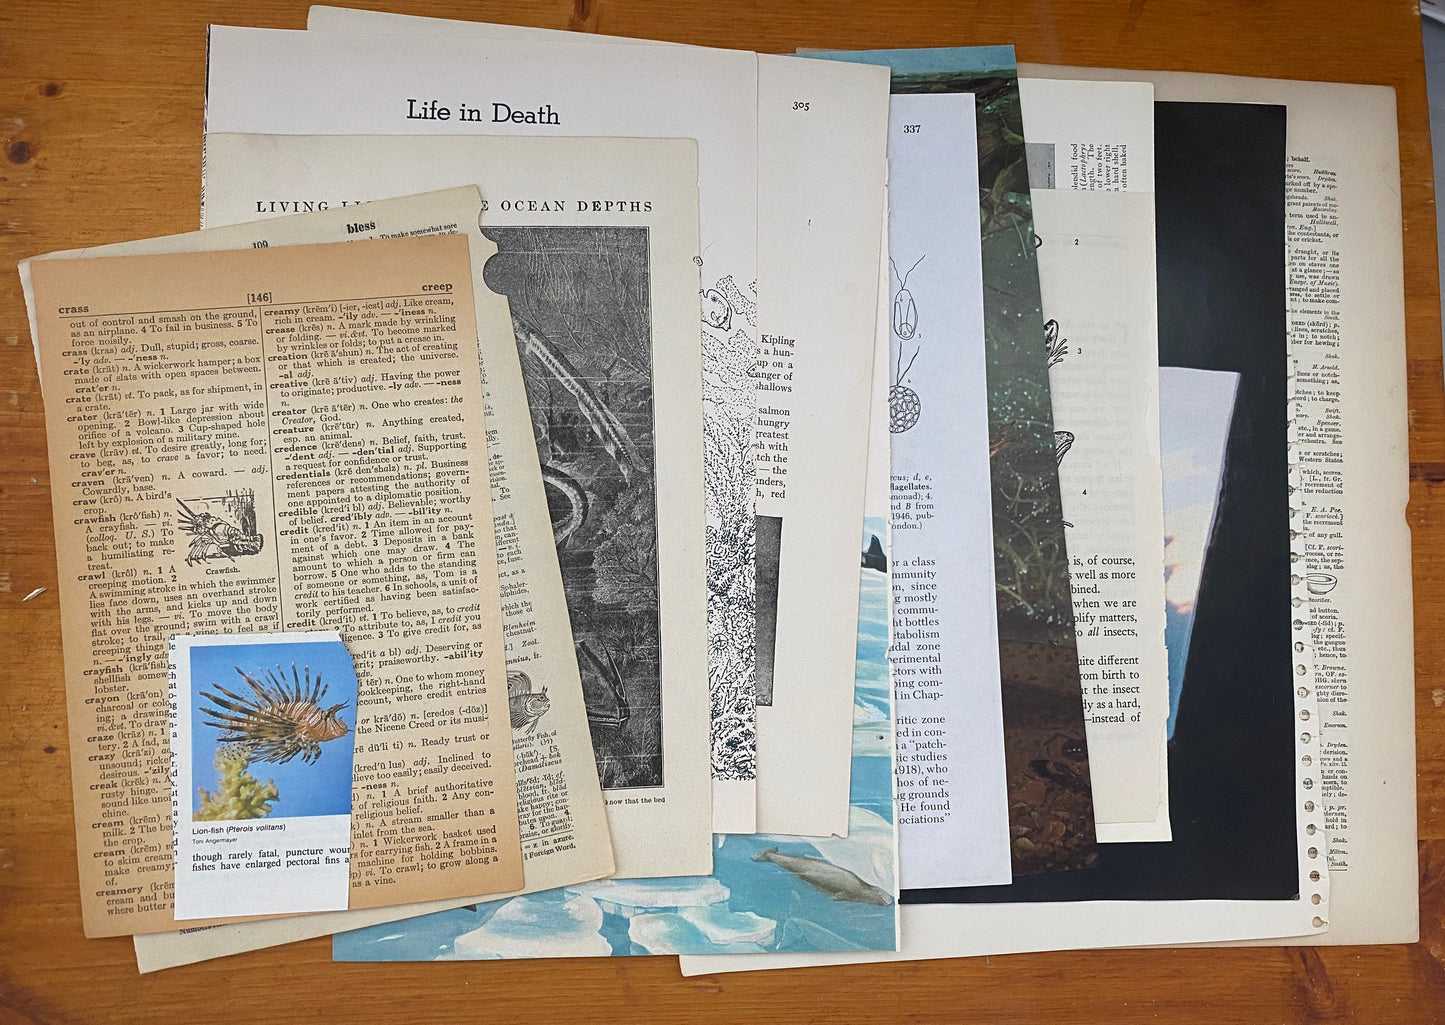 UNDER THE SEA: 1/8 lb mix of vintage fish & related book pages and papers for art, collage, junk journal, scrapbook, craft